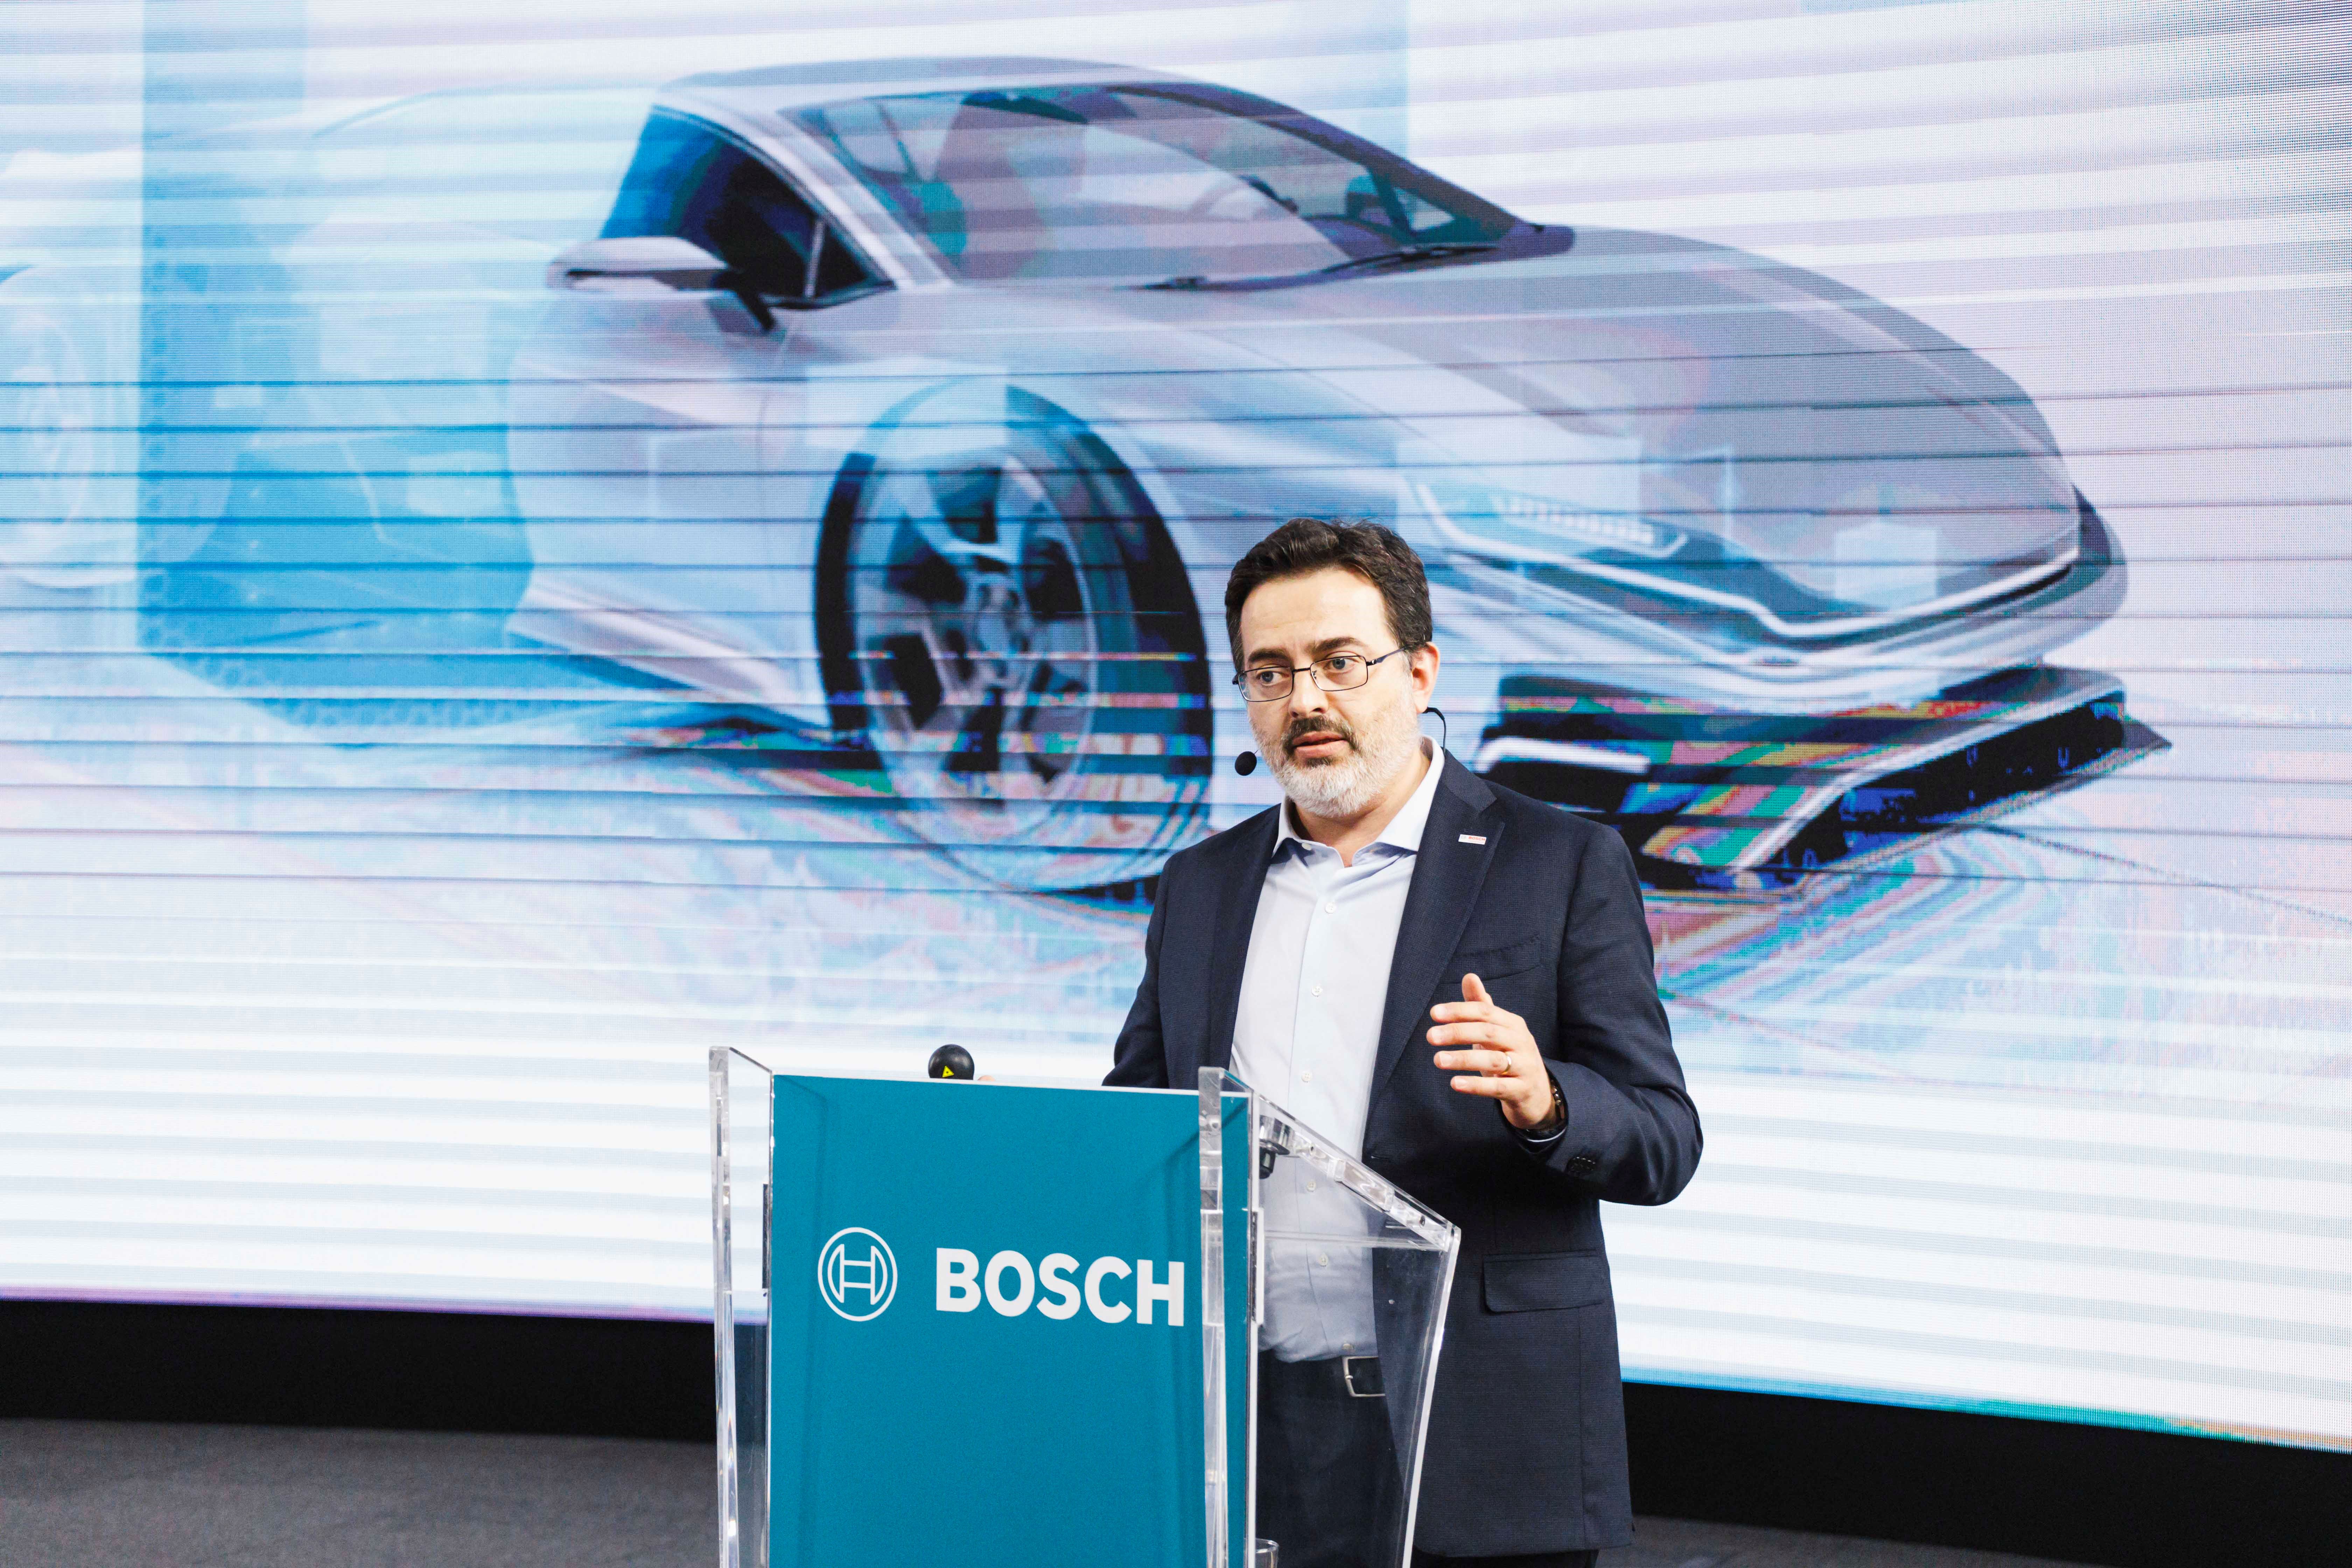 Gianfranco Fenocchio, General Manager Bosch Engineering in Italy